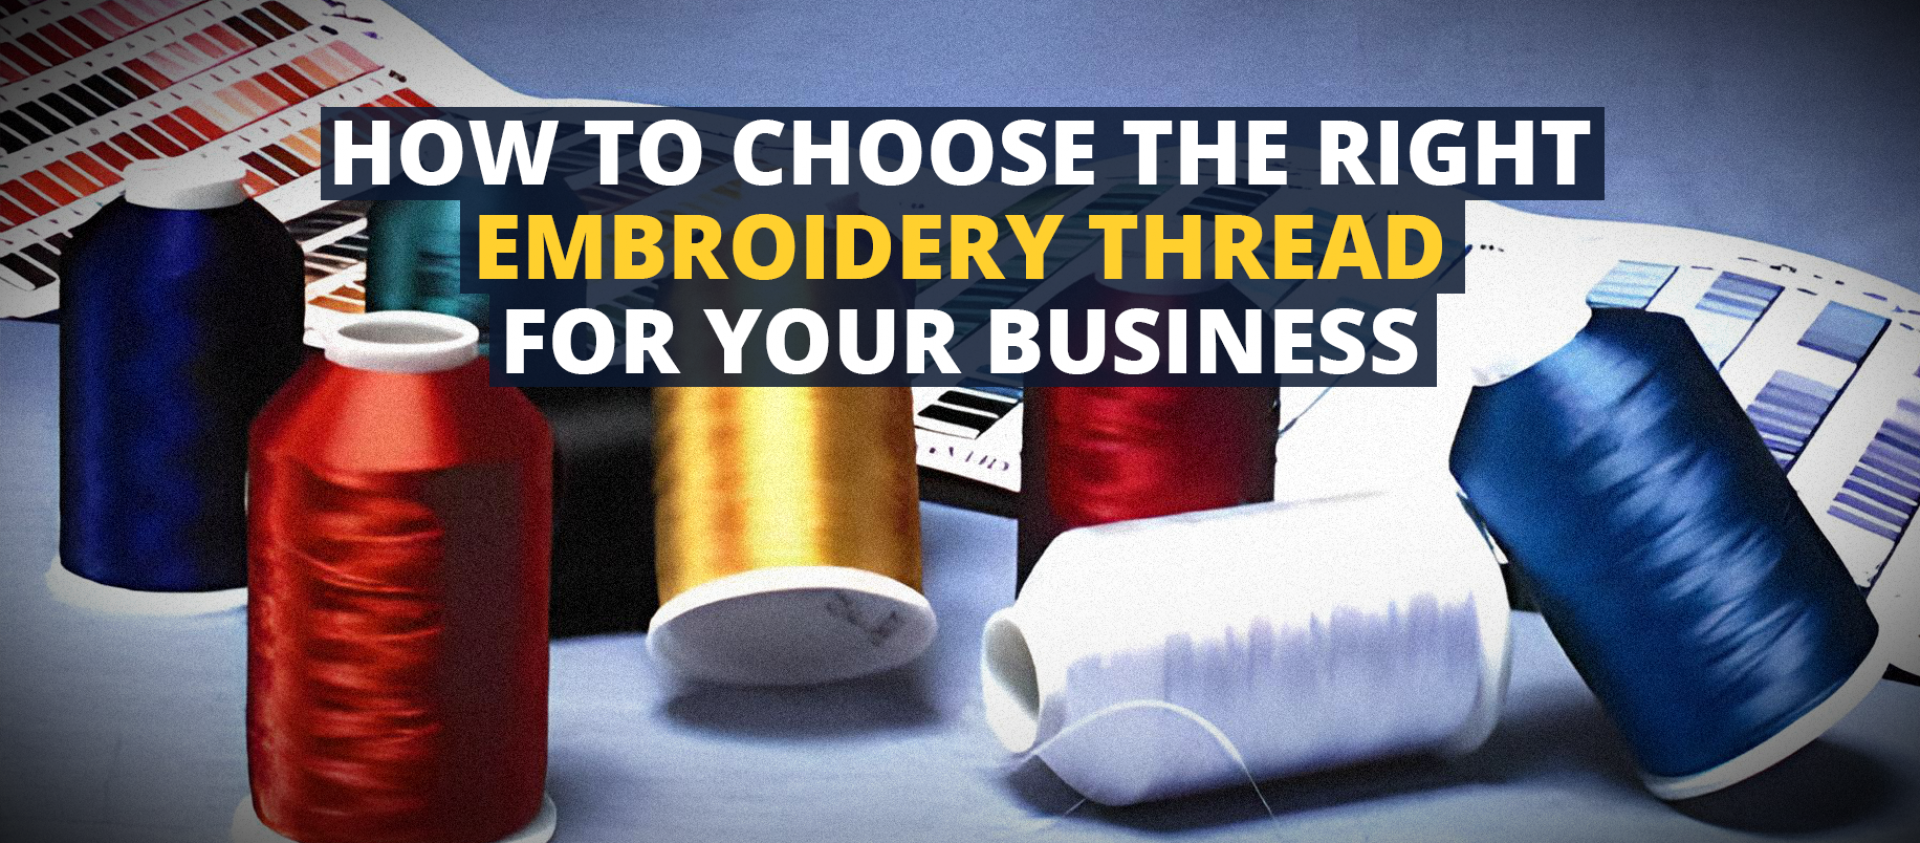 How-to-Choose-the-Right-Embroidery-Thread-for-Your-Business